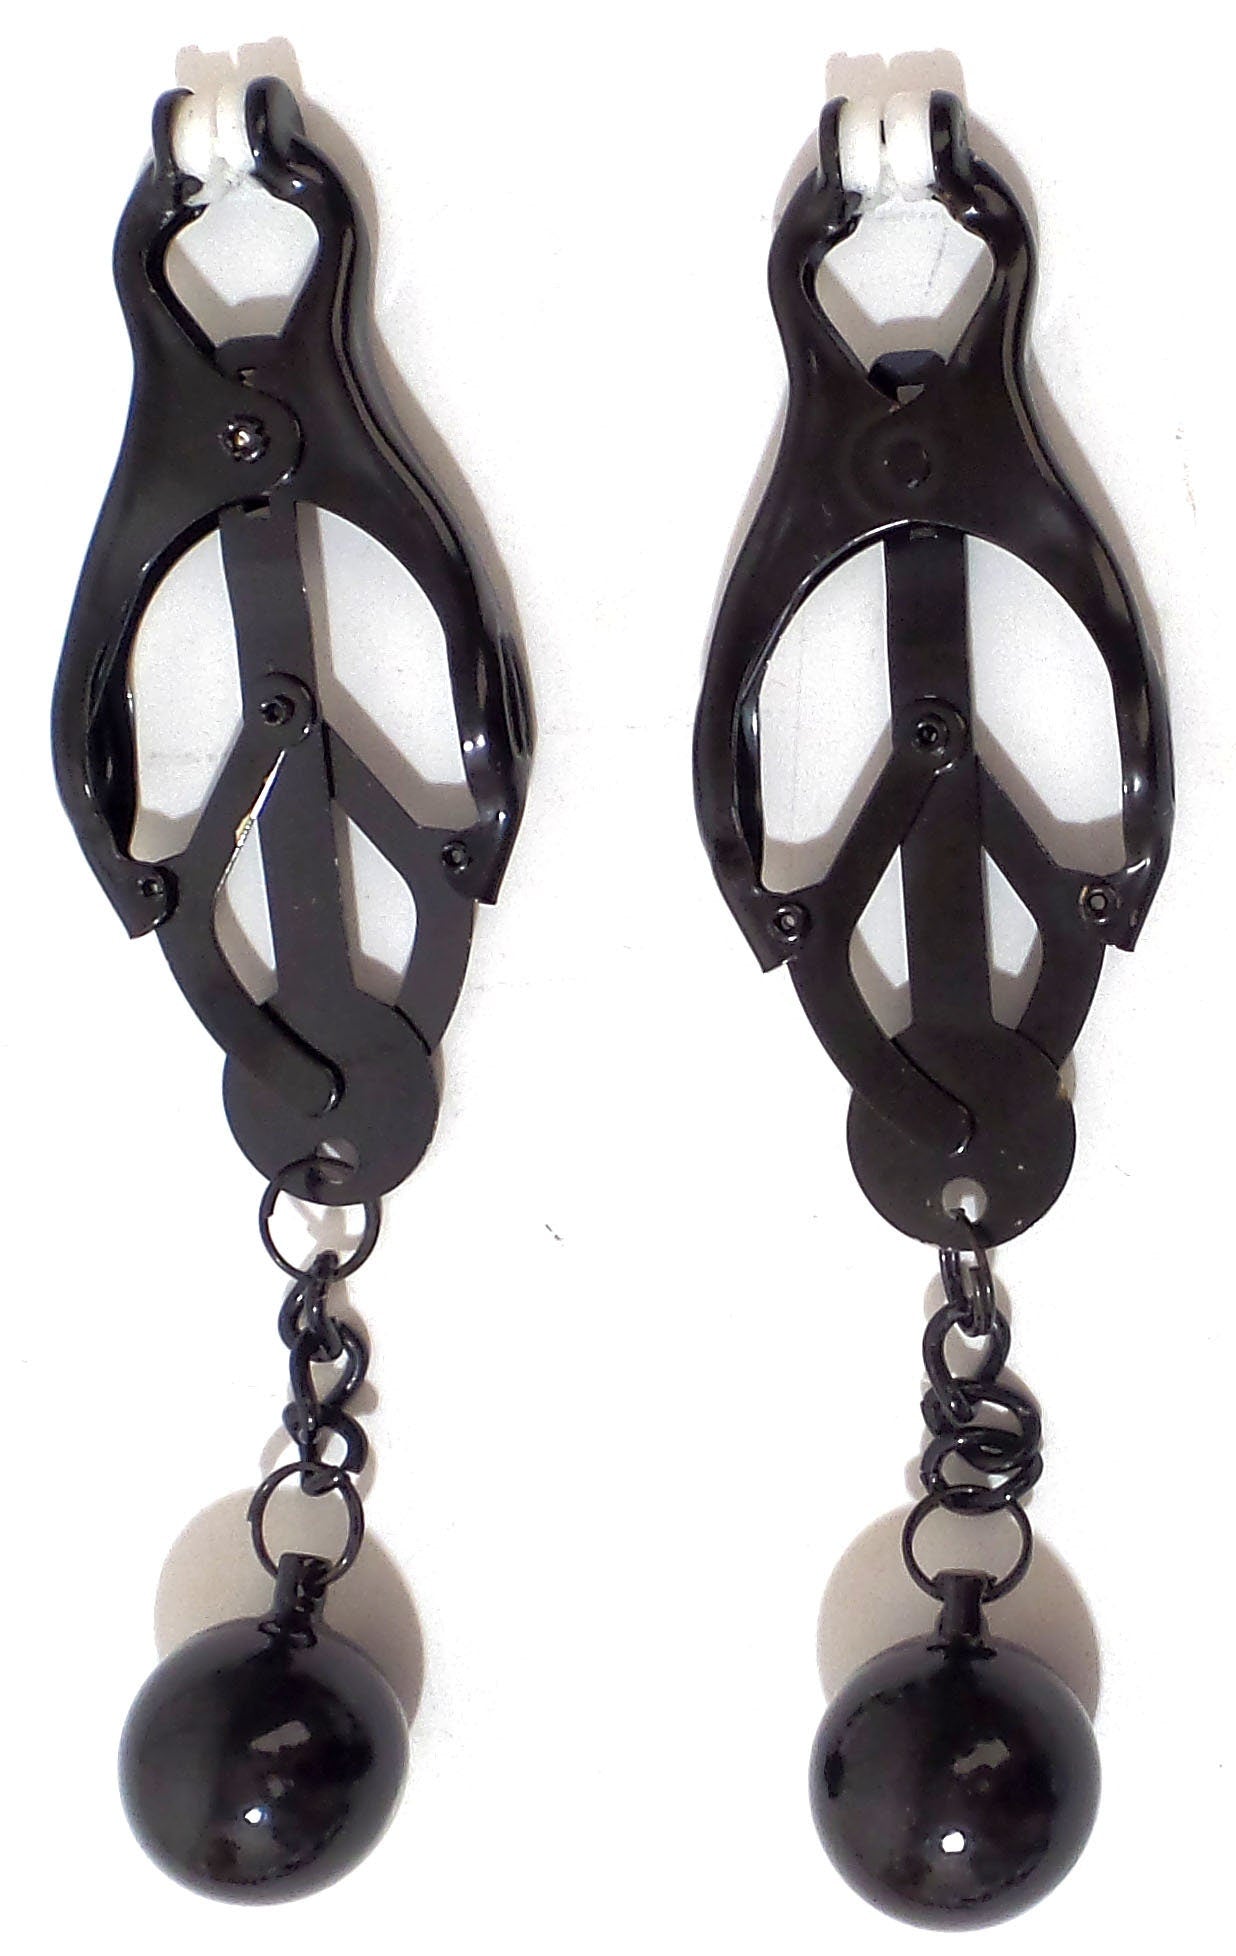 Bondage Ball Stretcher, Magnetic Ball Weights, Testicle Stretcher